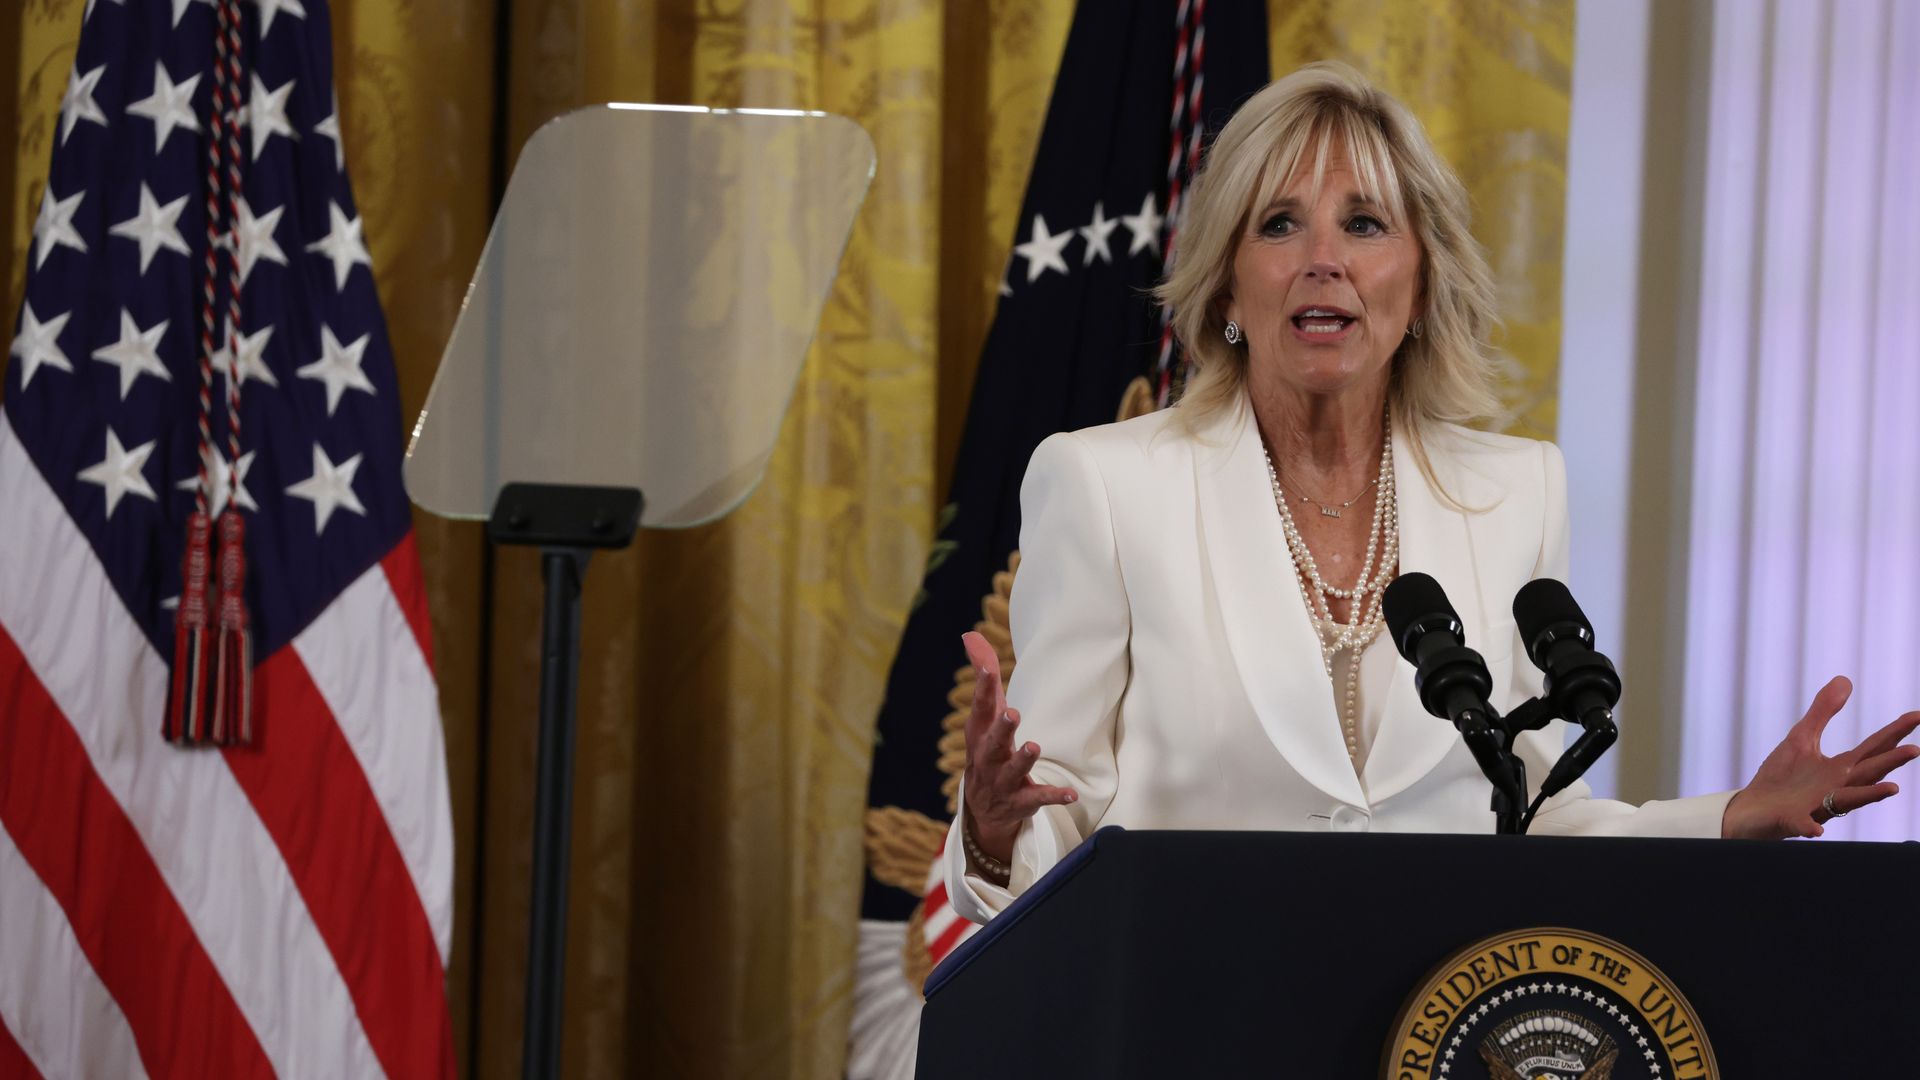 Jill Biden speaks at an event celebrating Pride month in the East Room of the White House June 15